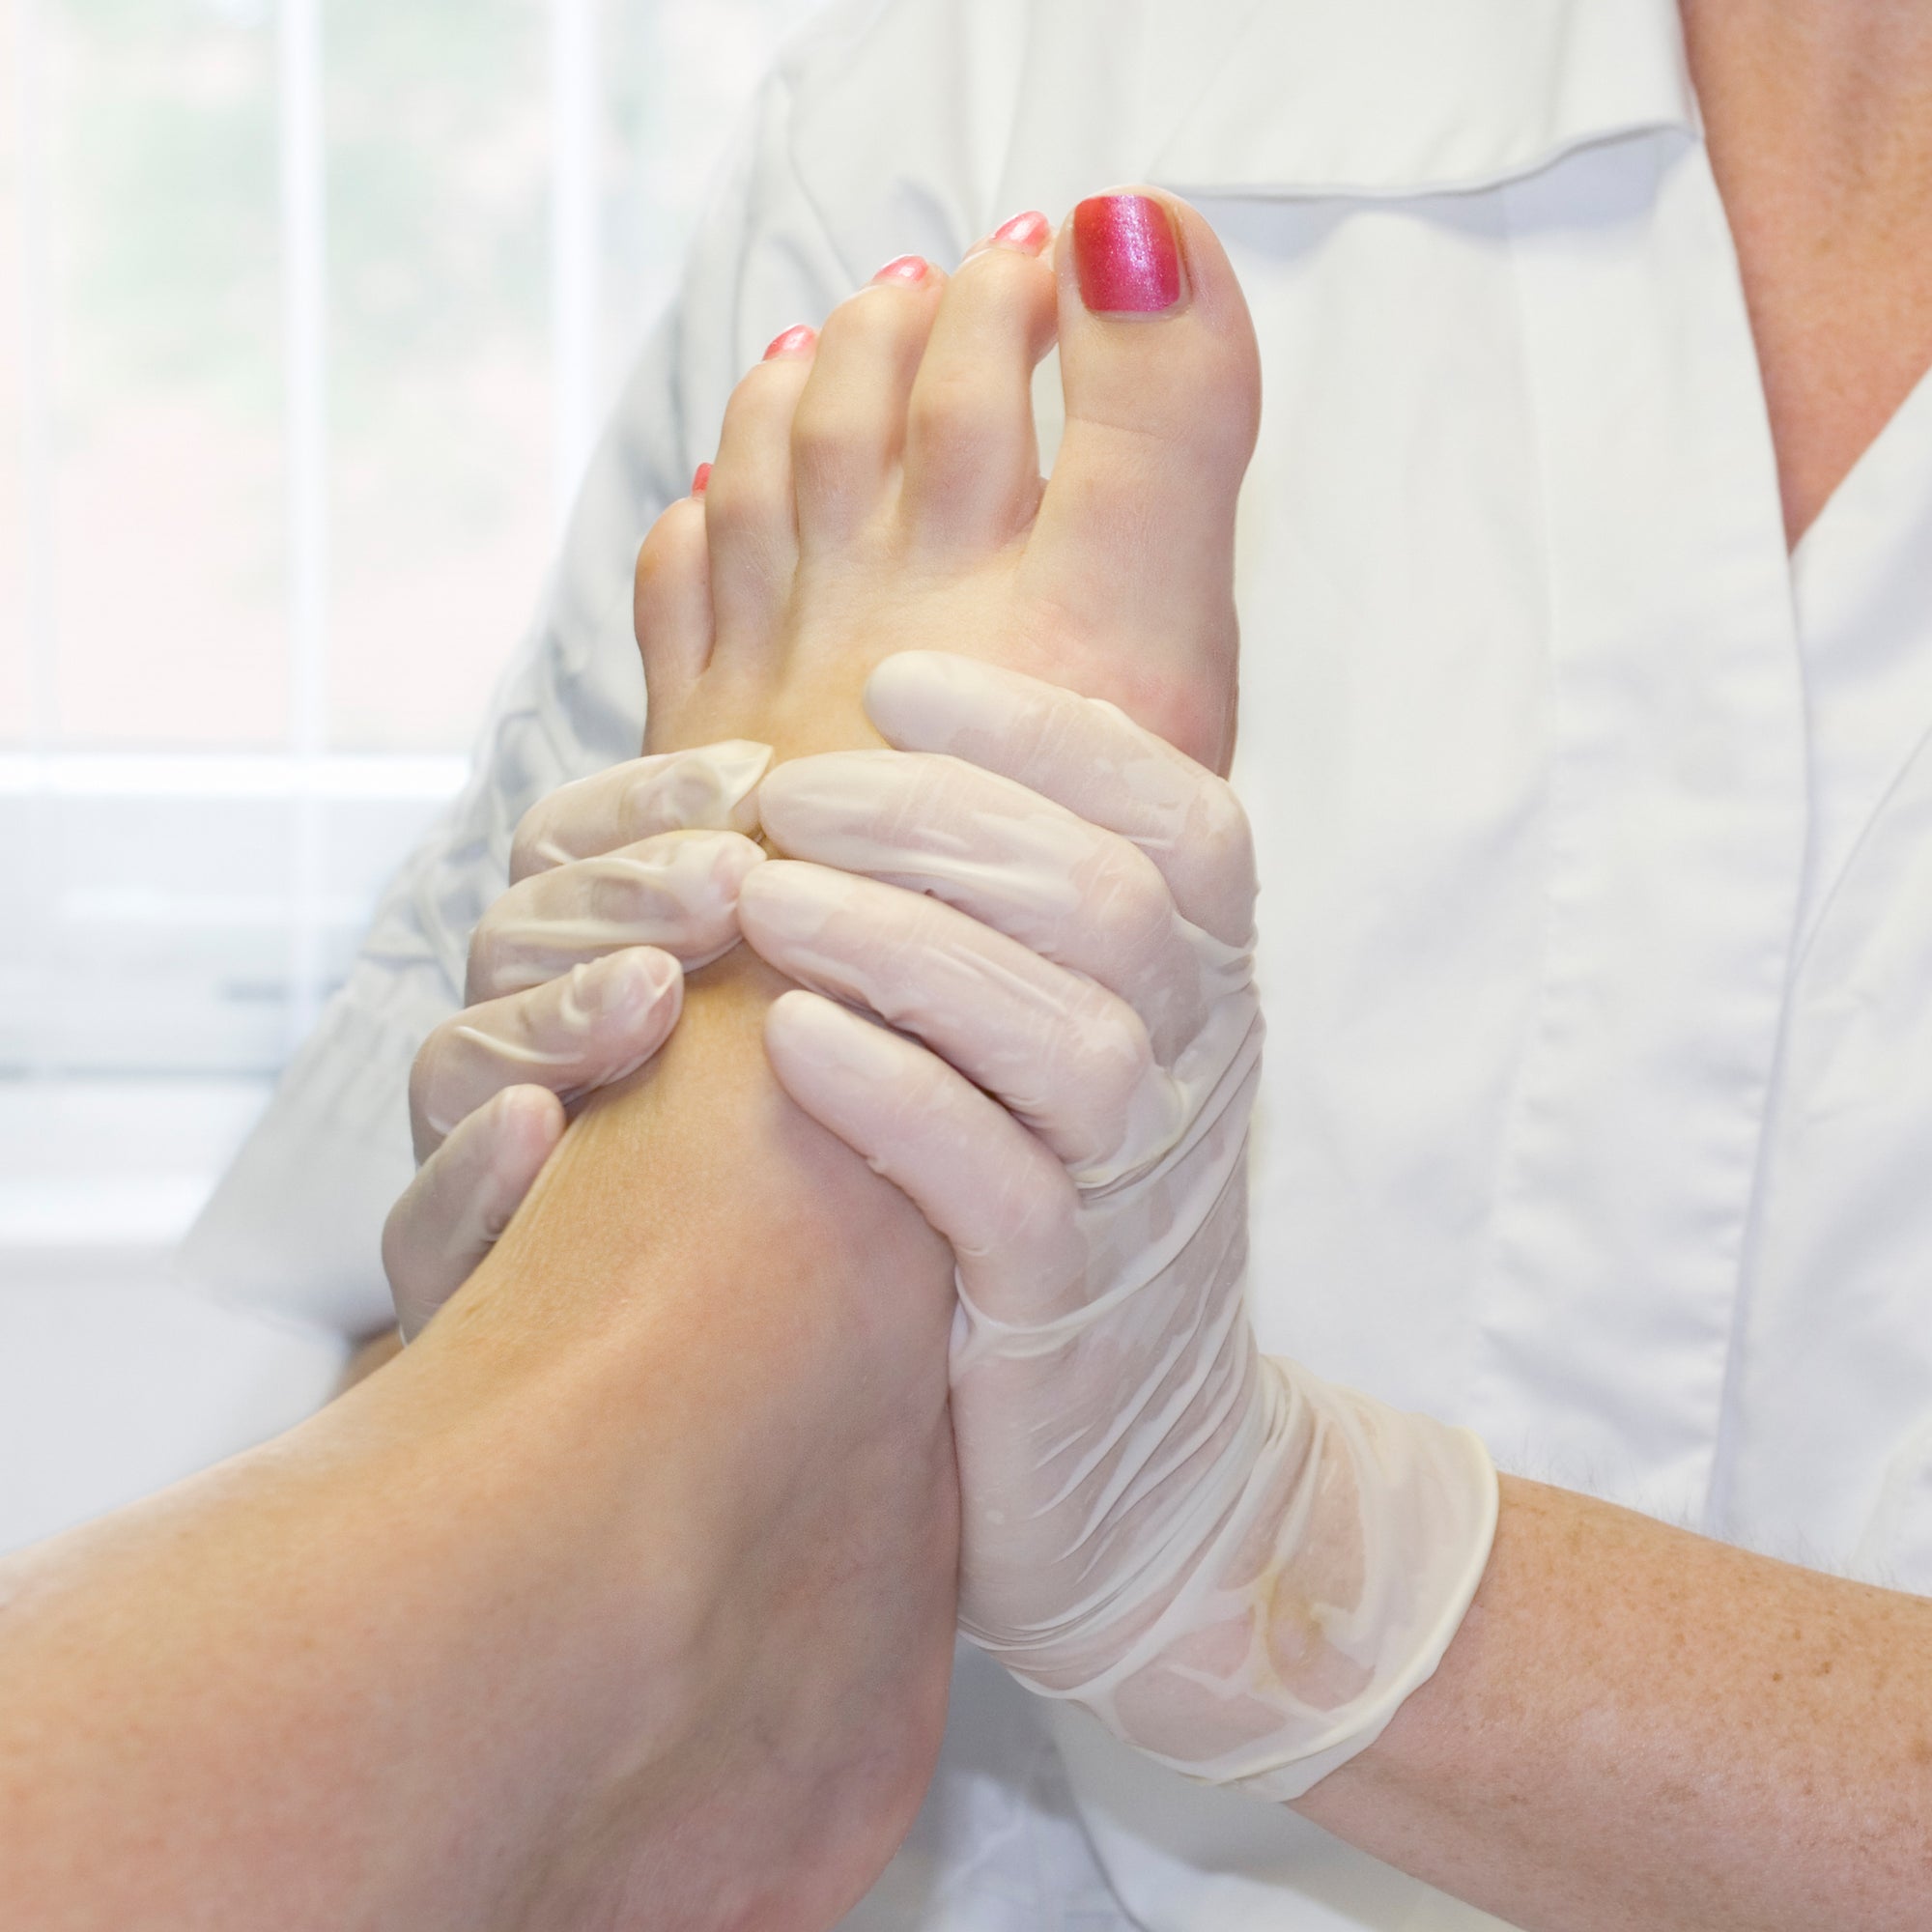 Podiatrist holding a person's foot during a pedicure treatment